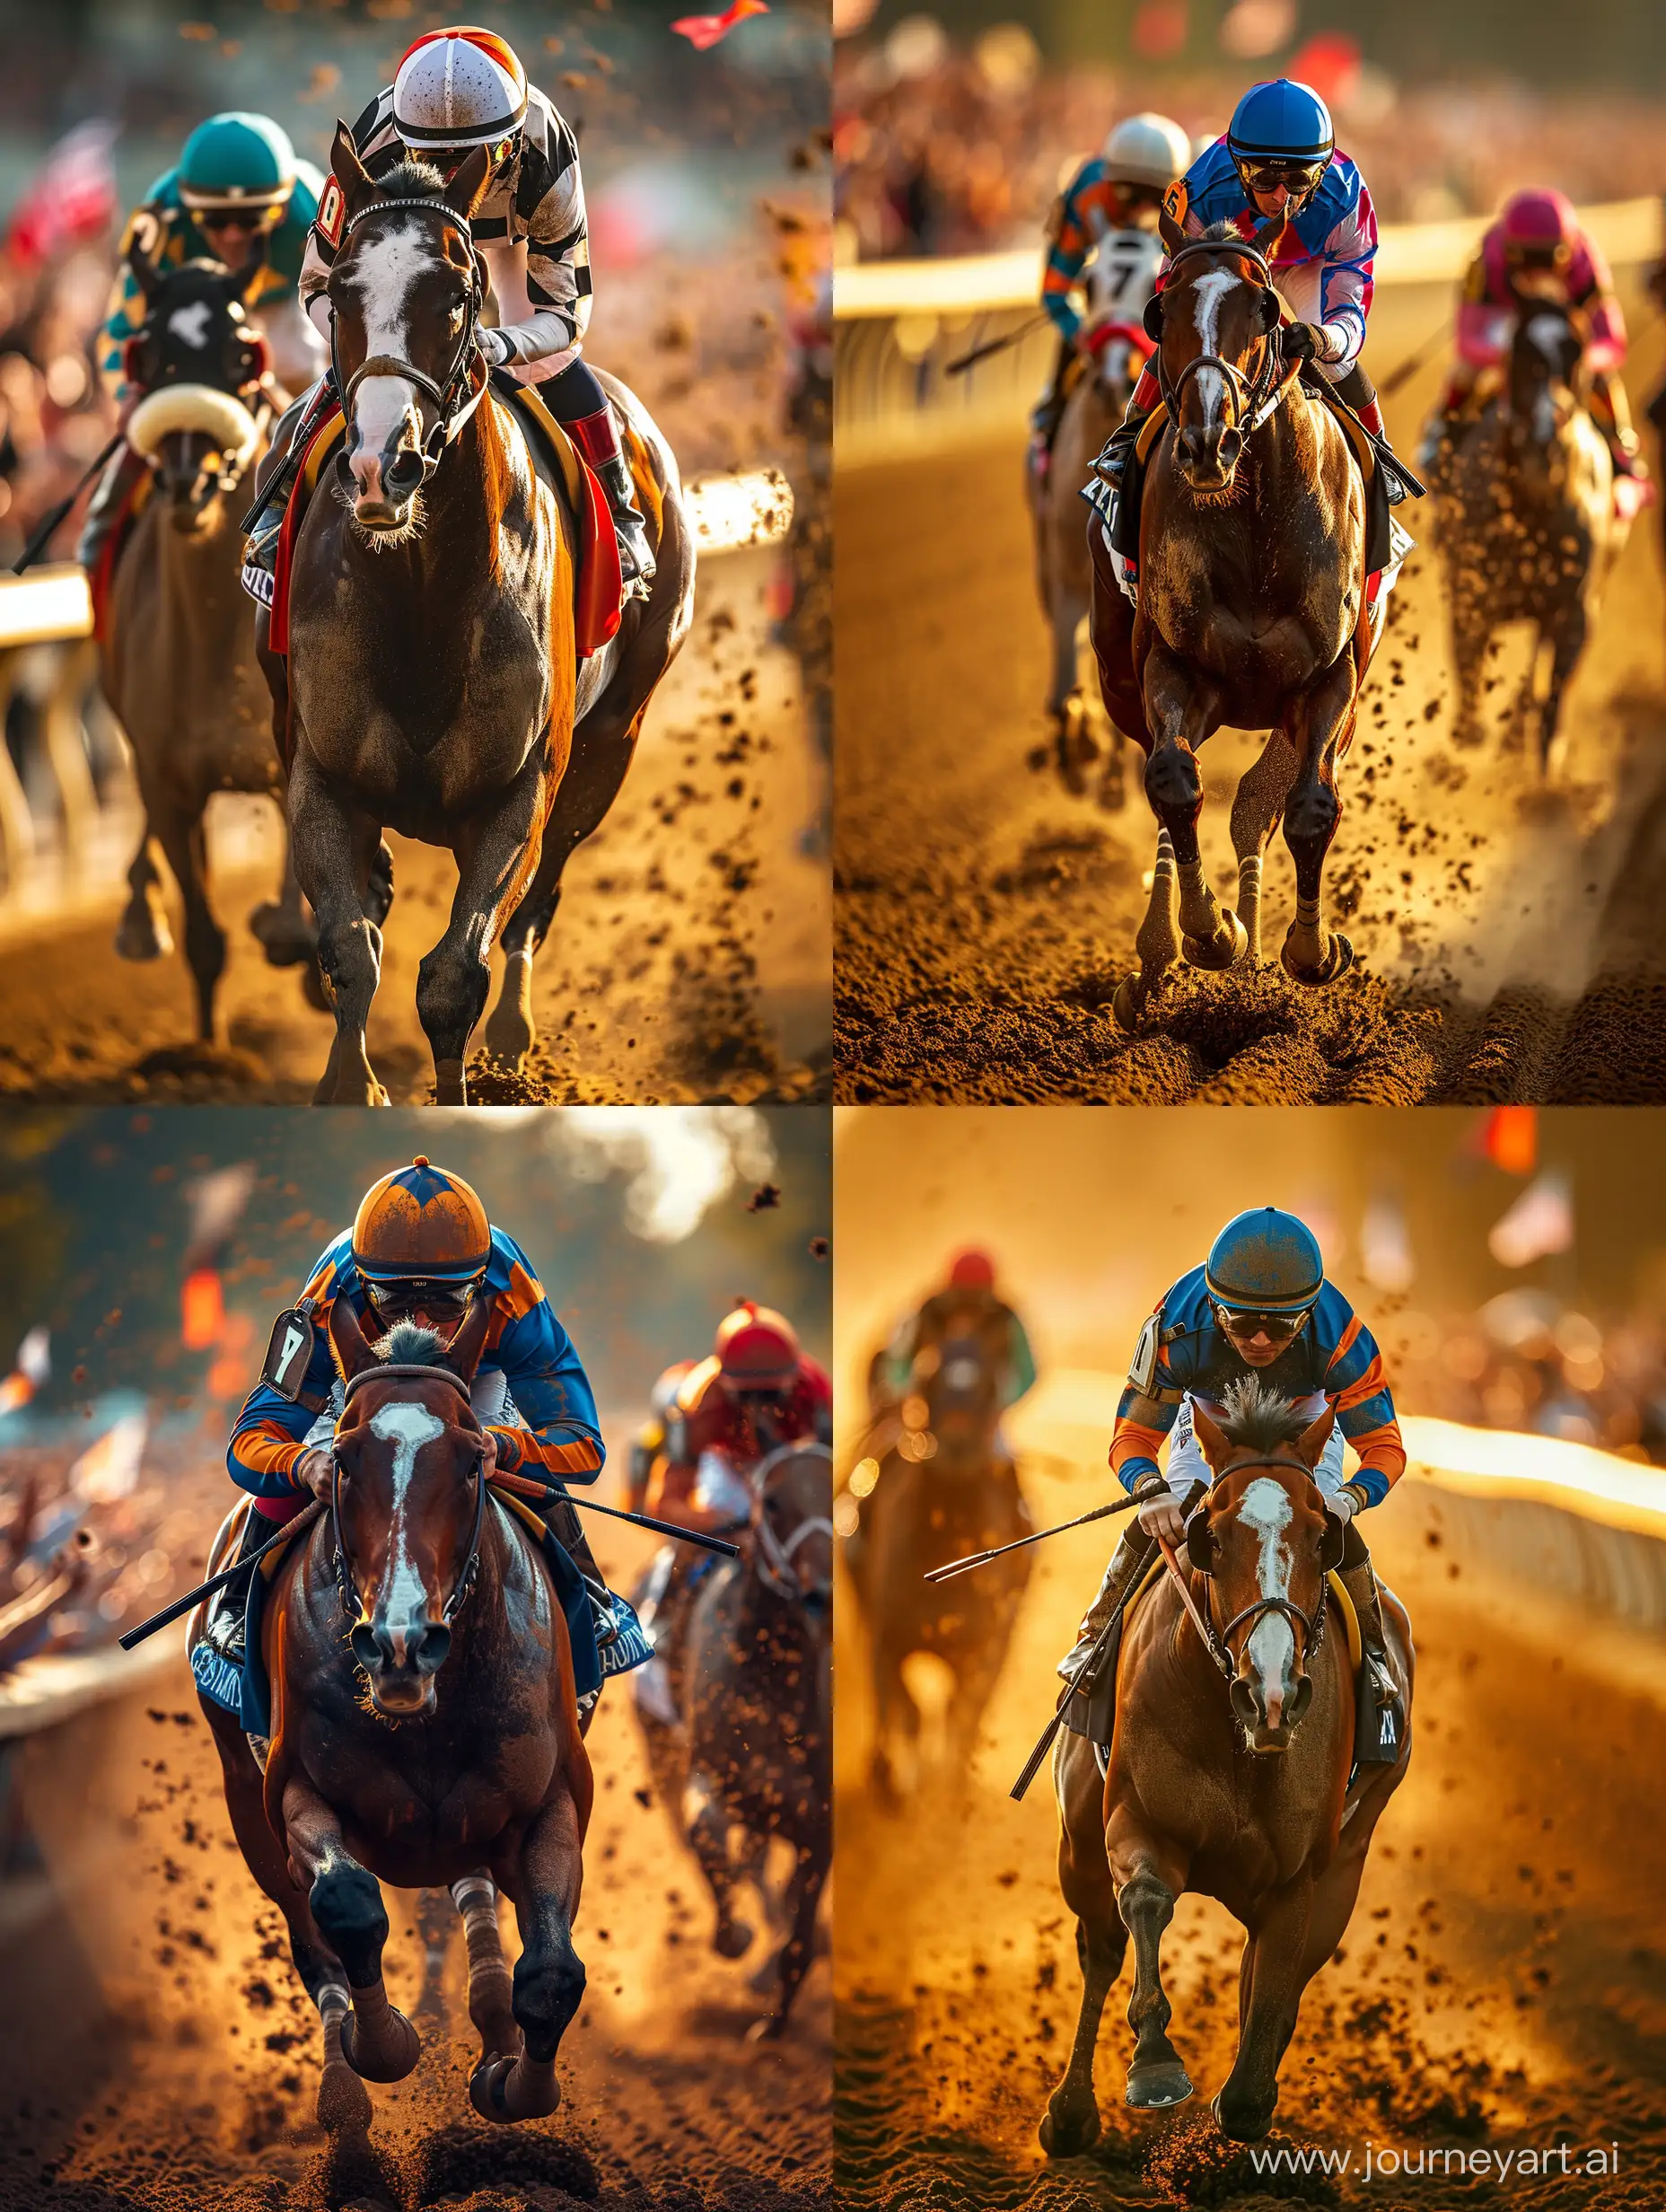 Thrilling-Horse-Race-Jockeys-in-Colorful-Silks-Competing-on-a-Sunlit-Track